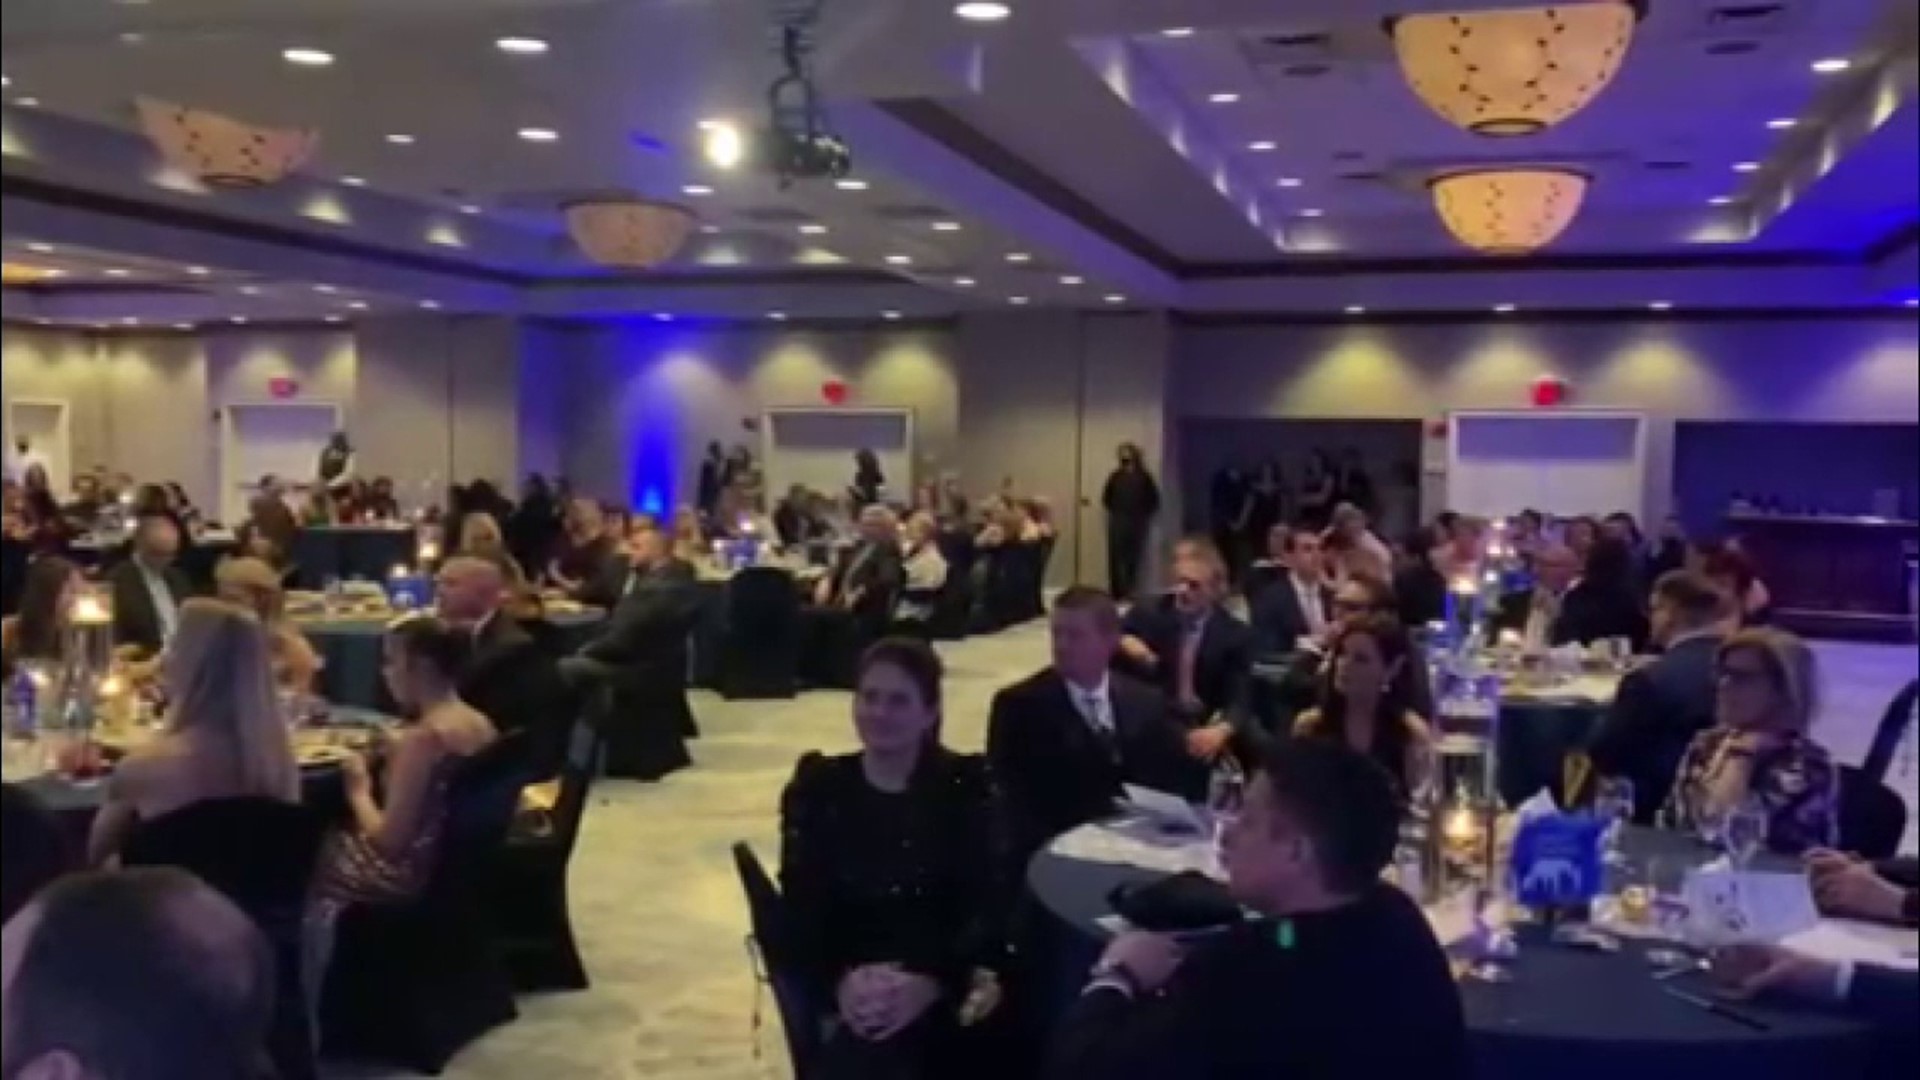 The gala was held at the Hilton in downtown Scranton Saturday night.